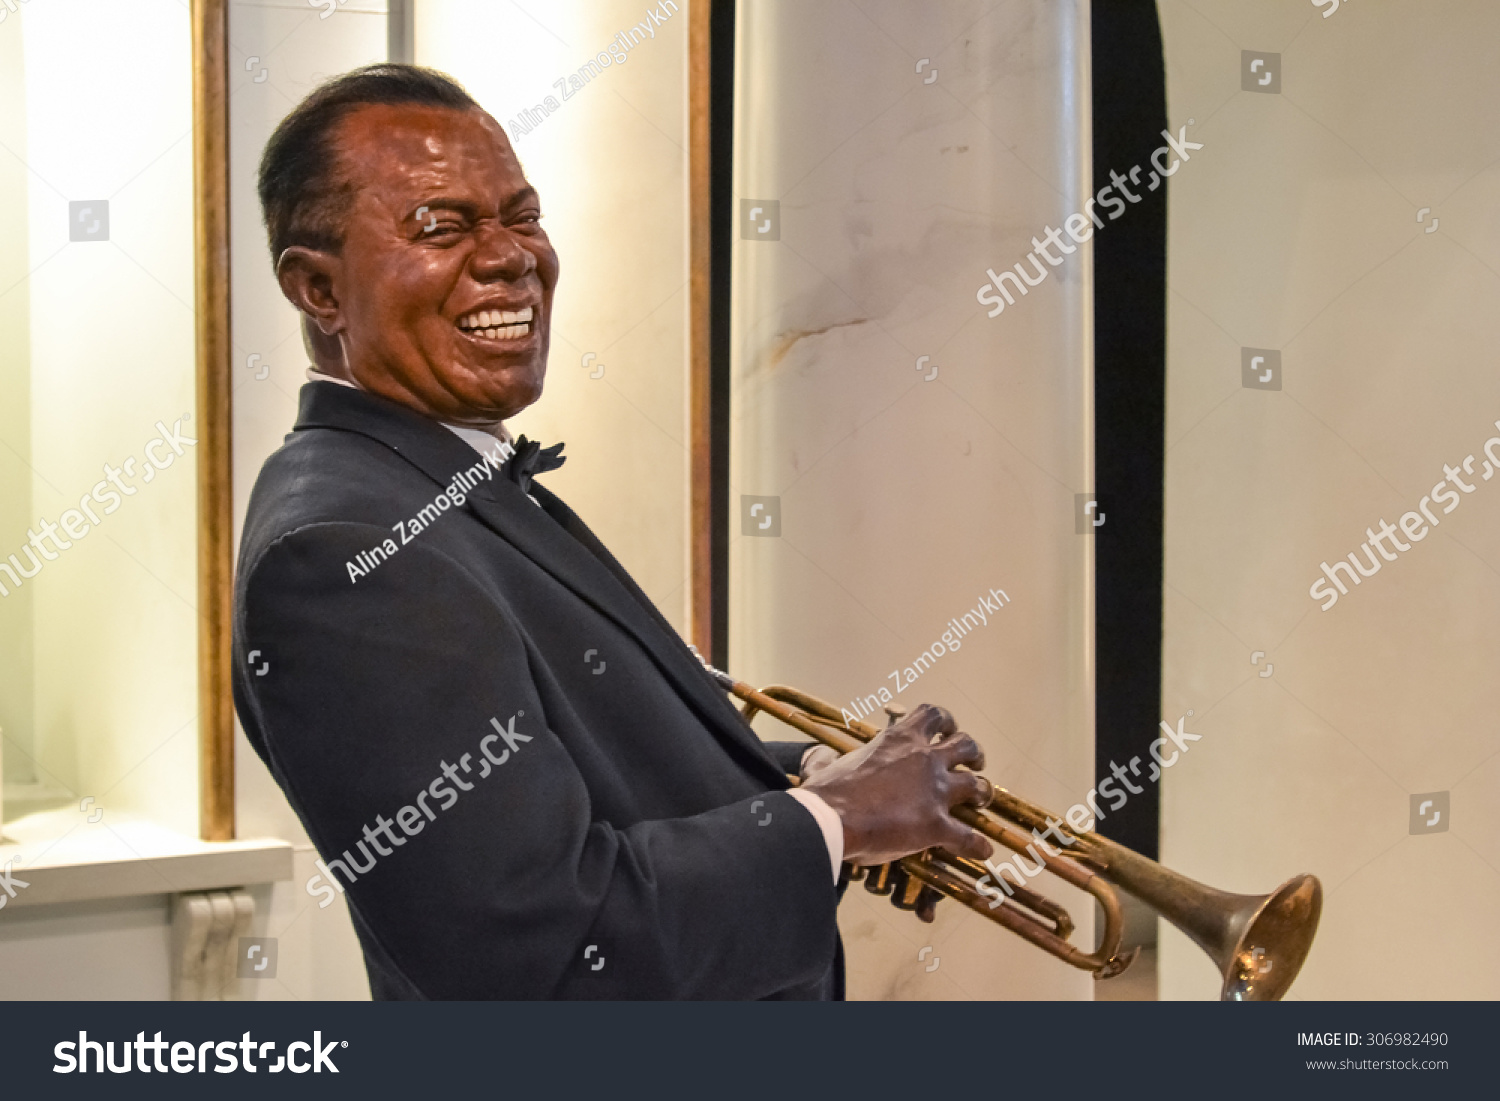 Louis armstrong images stock photos d objects vectors